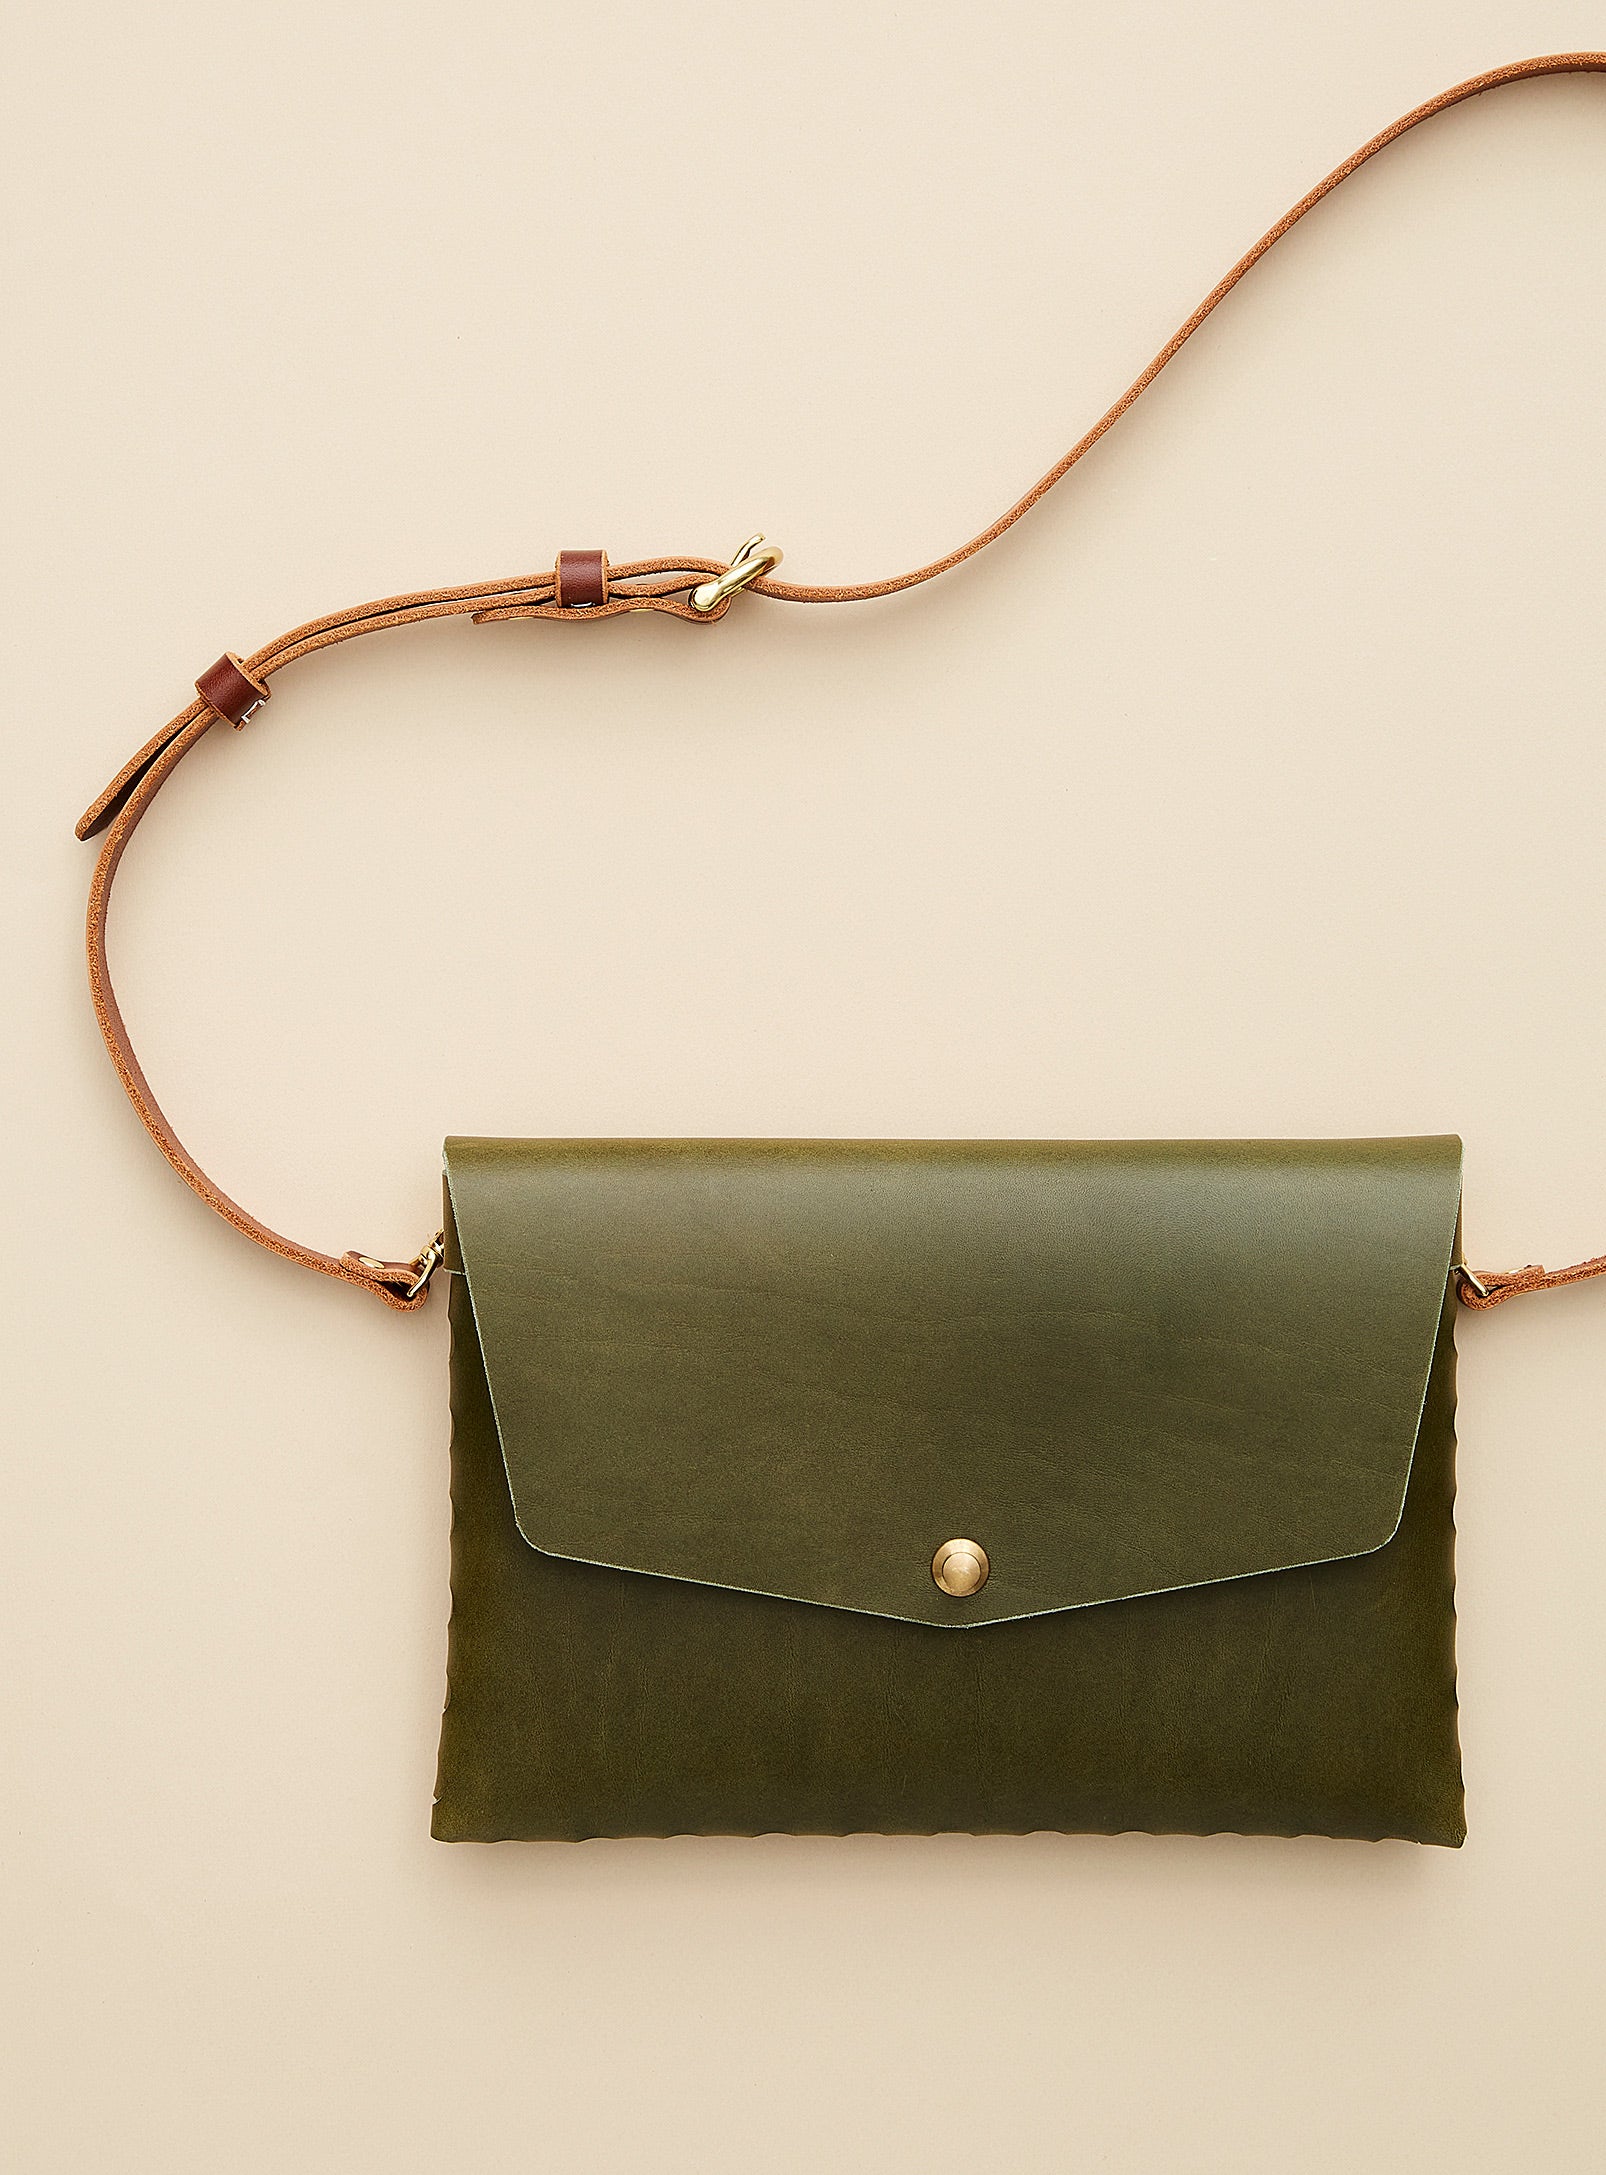 modjūl’s leather mini bag deluxe bag in olive. A larger take on the classic mini bag, a rectangular-shaped bag with long detachable straps, handcrafted in Canada using quality Italian leather and brass hardware.